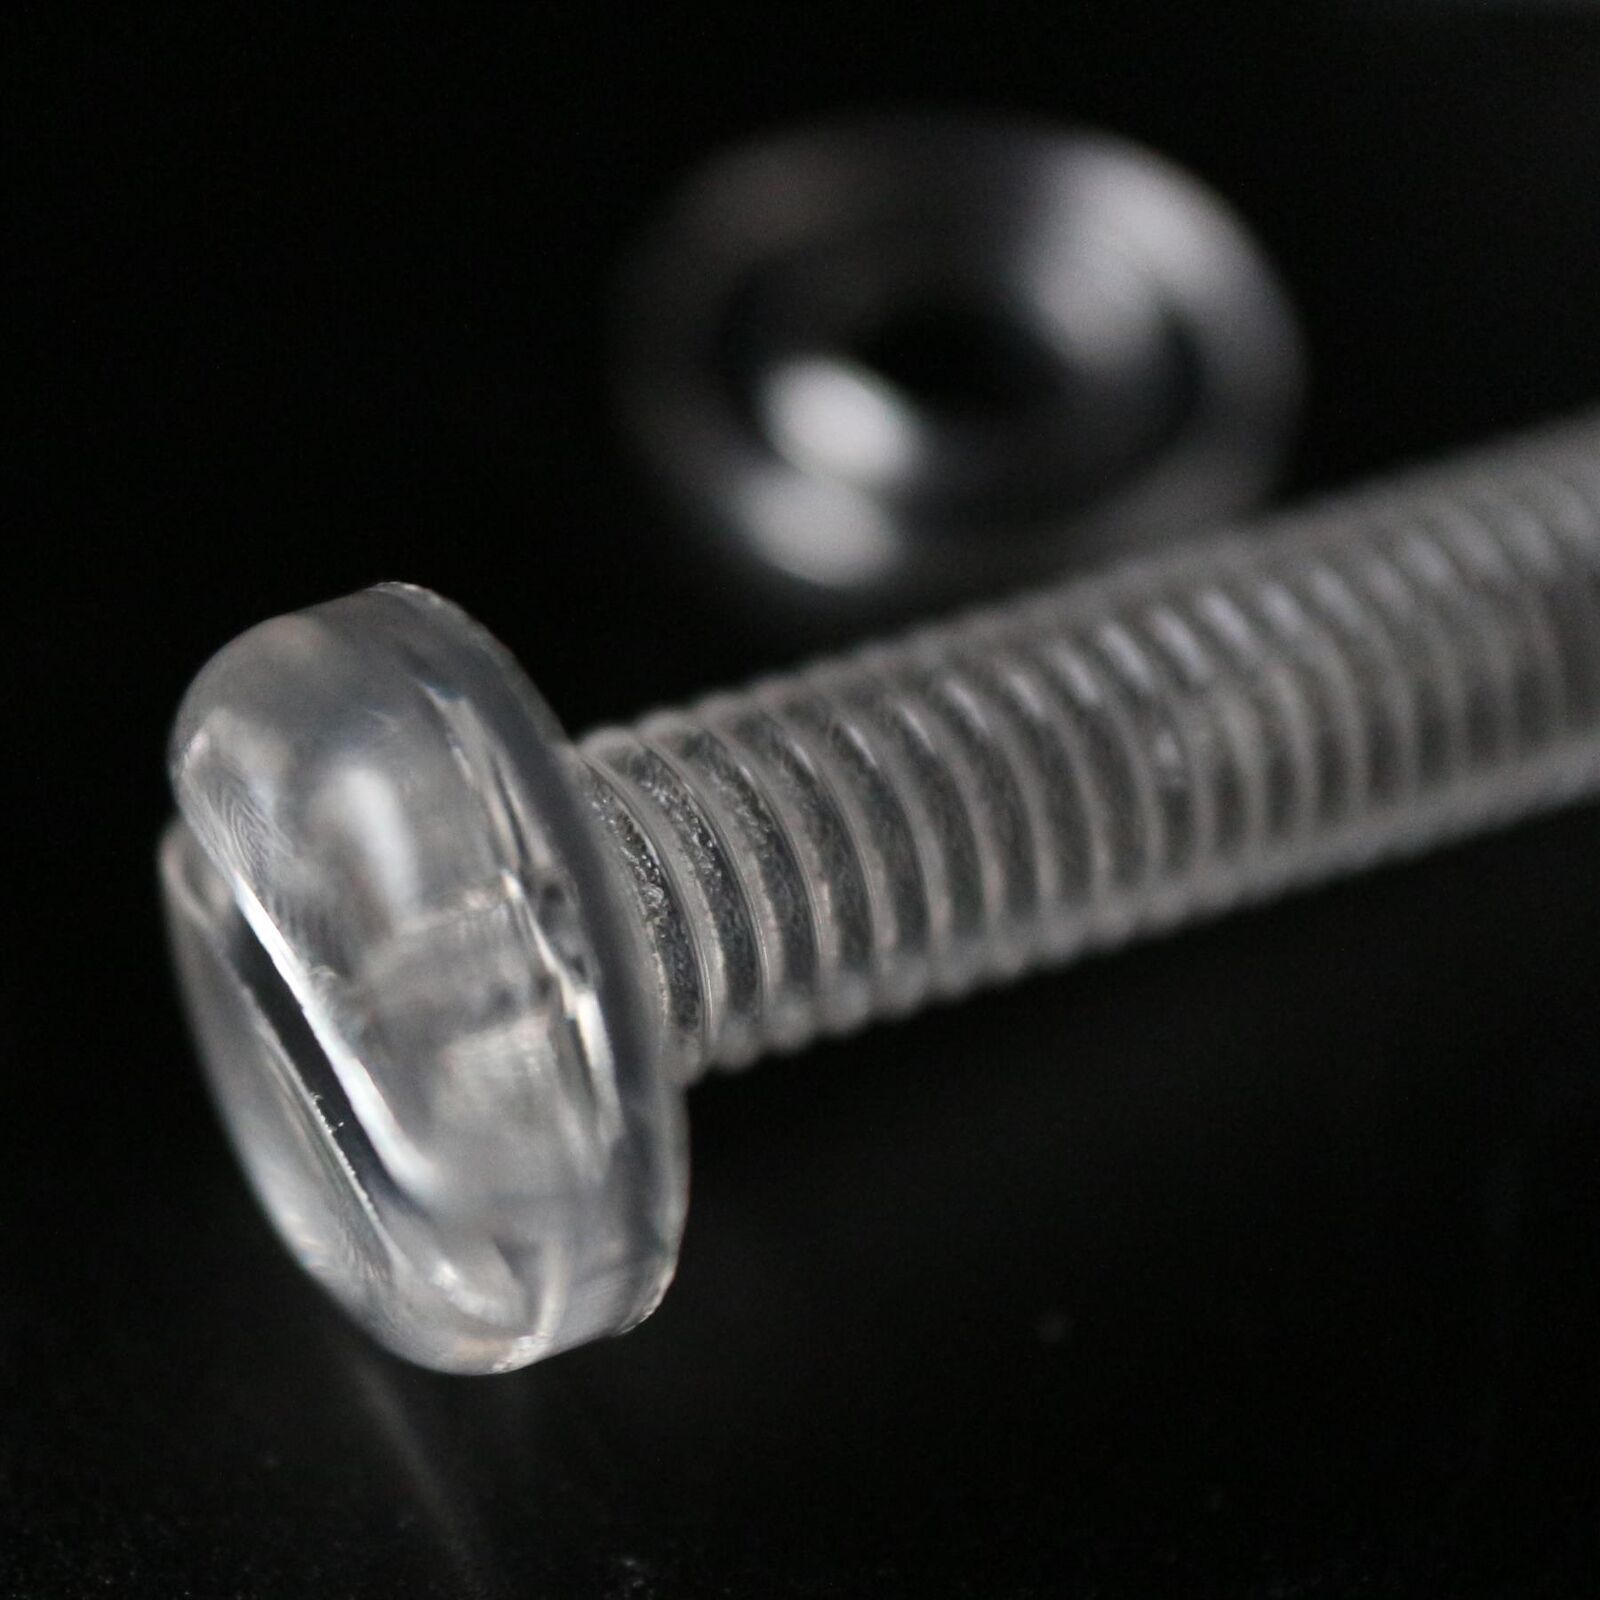 Primary image for 20x Slotted Round Head Screw, Acrylic Plastic, M6 x 40mm-
show original title...